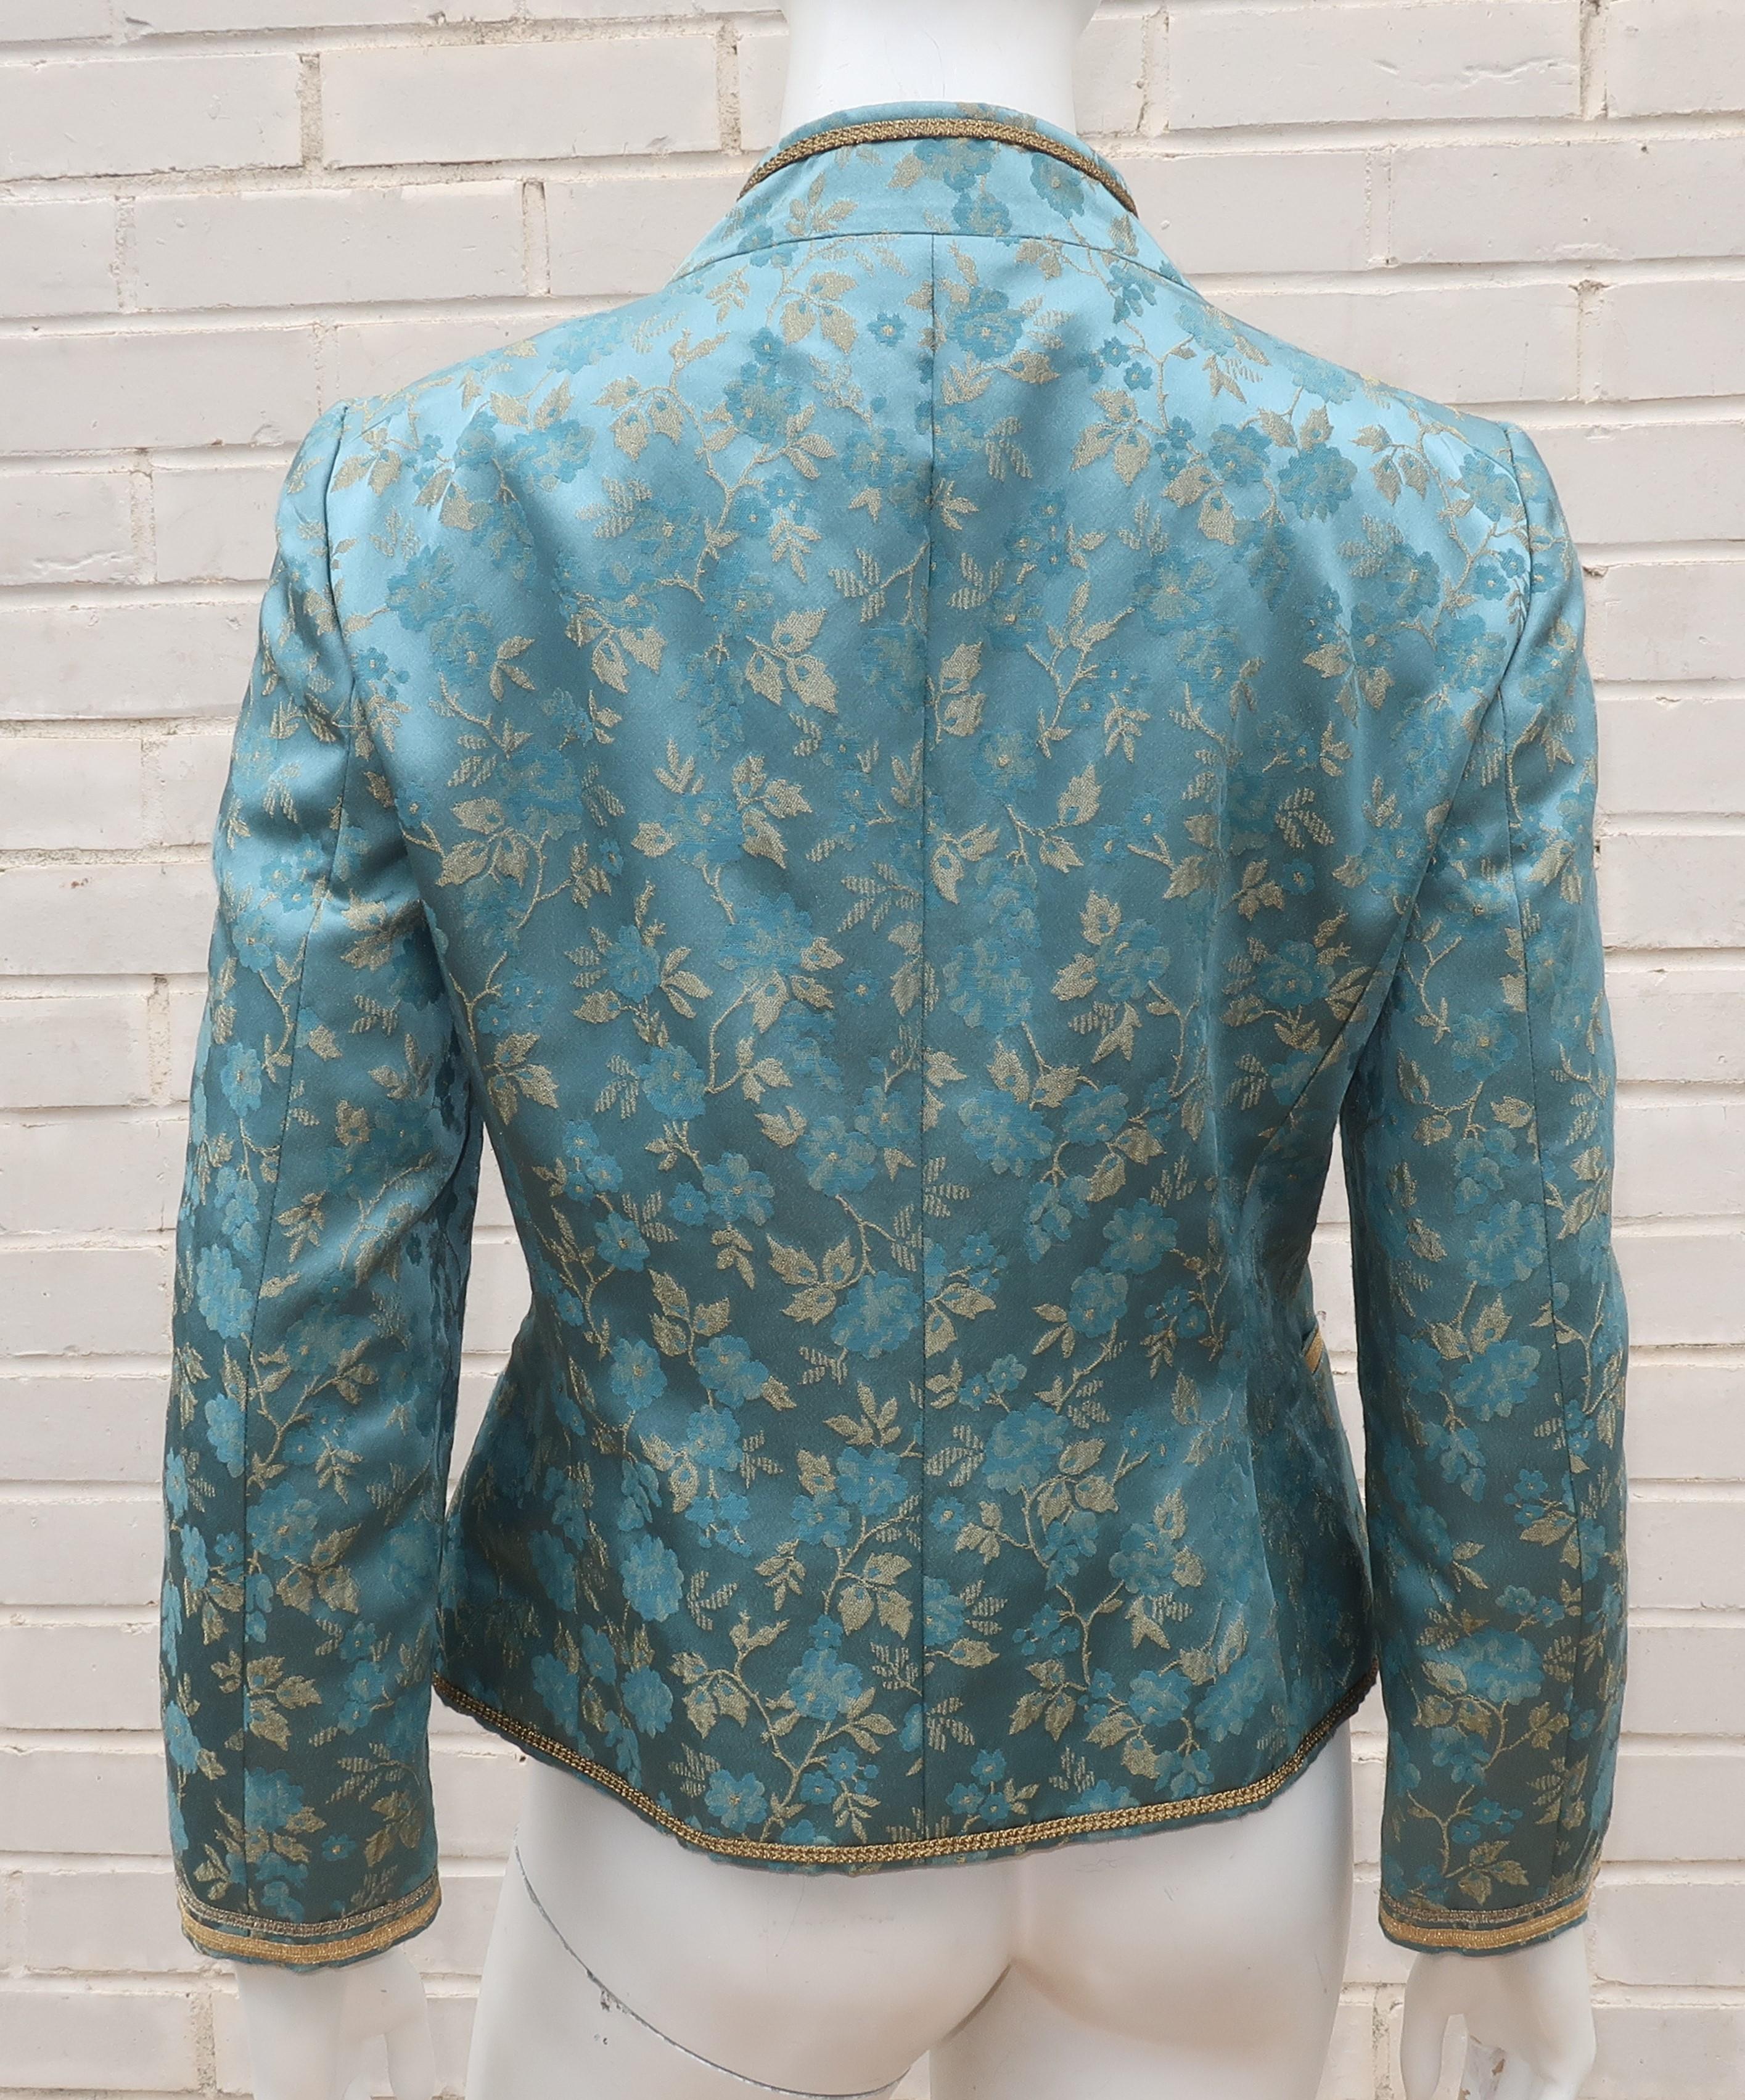 Moschino ‘Bollywood’ Brocade Jacket With Dragonfly Motif 4